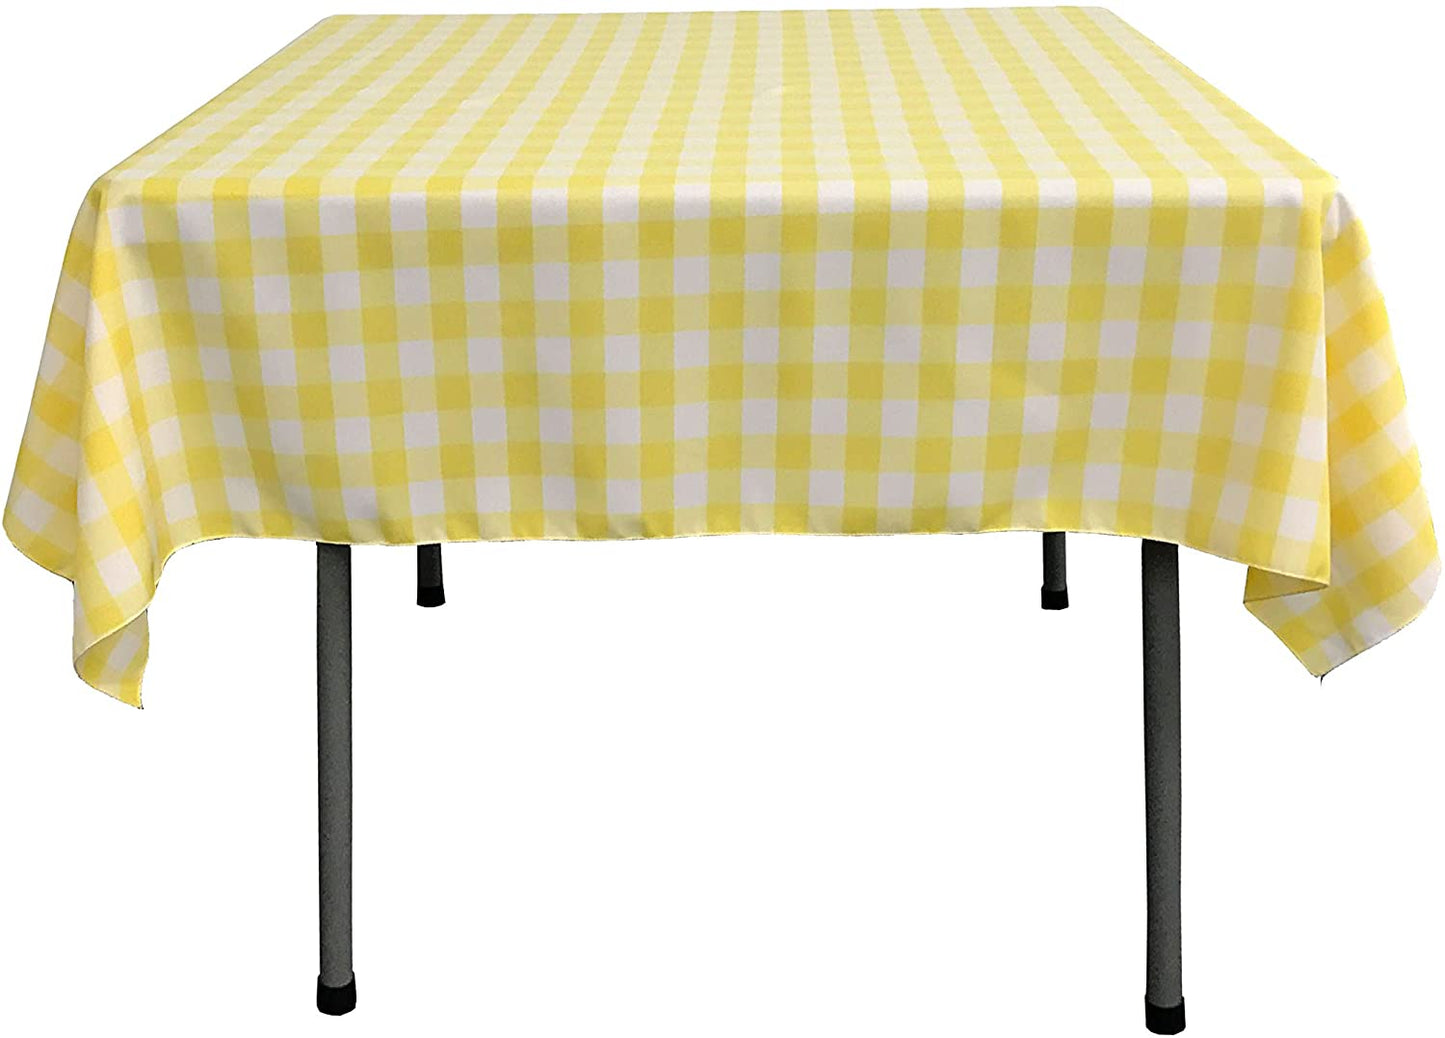 Gingham Checkered Square Tablecloth Lt Yellow and White